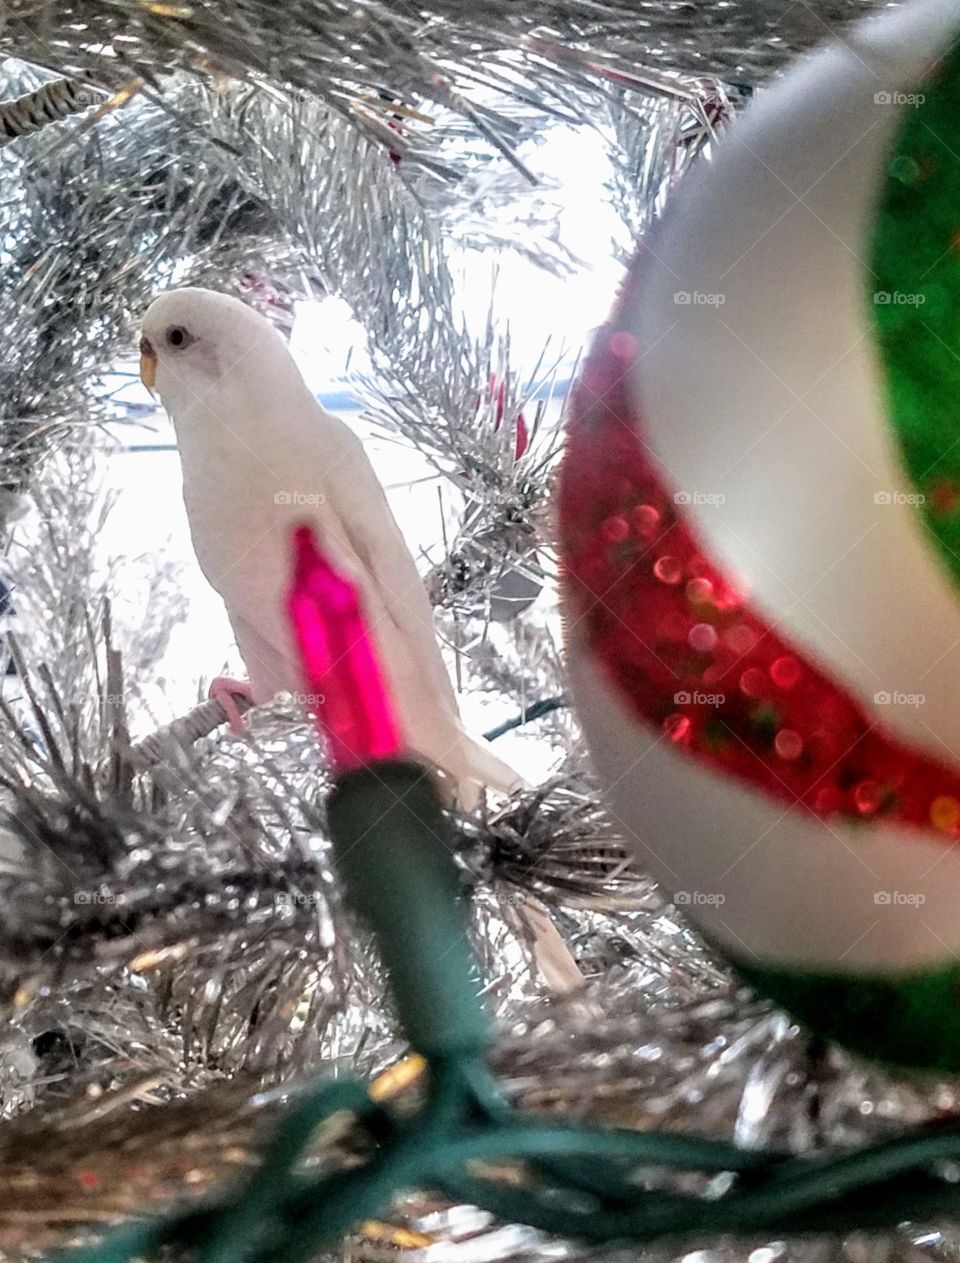 Here is another close up of my brother's white parakeet who escaped in to the family's vintage silver Christmas tree- they didn't think find my version of partridge in a pear tree as funny